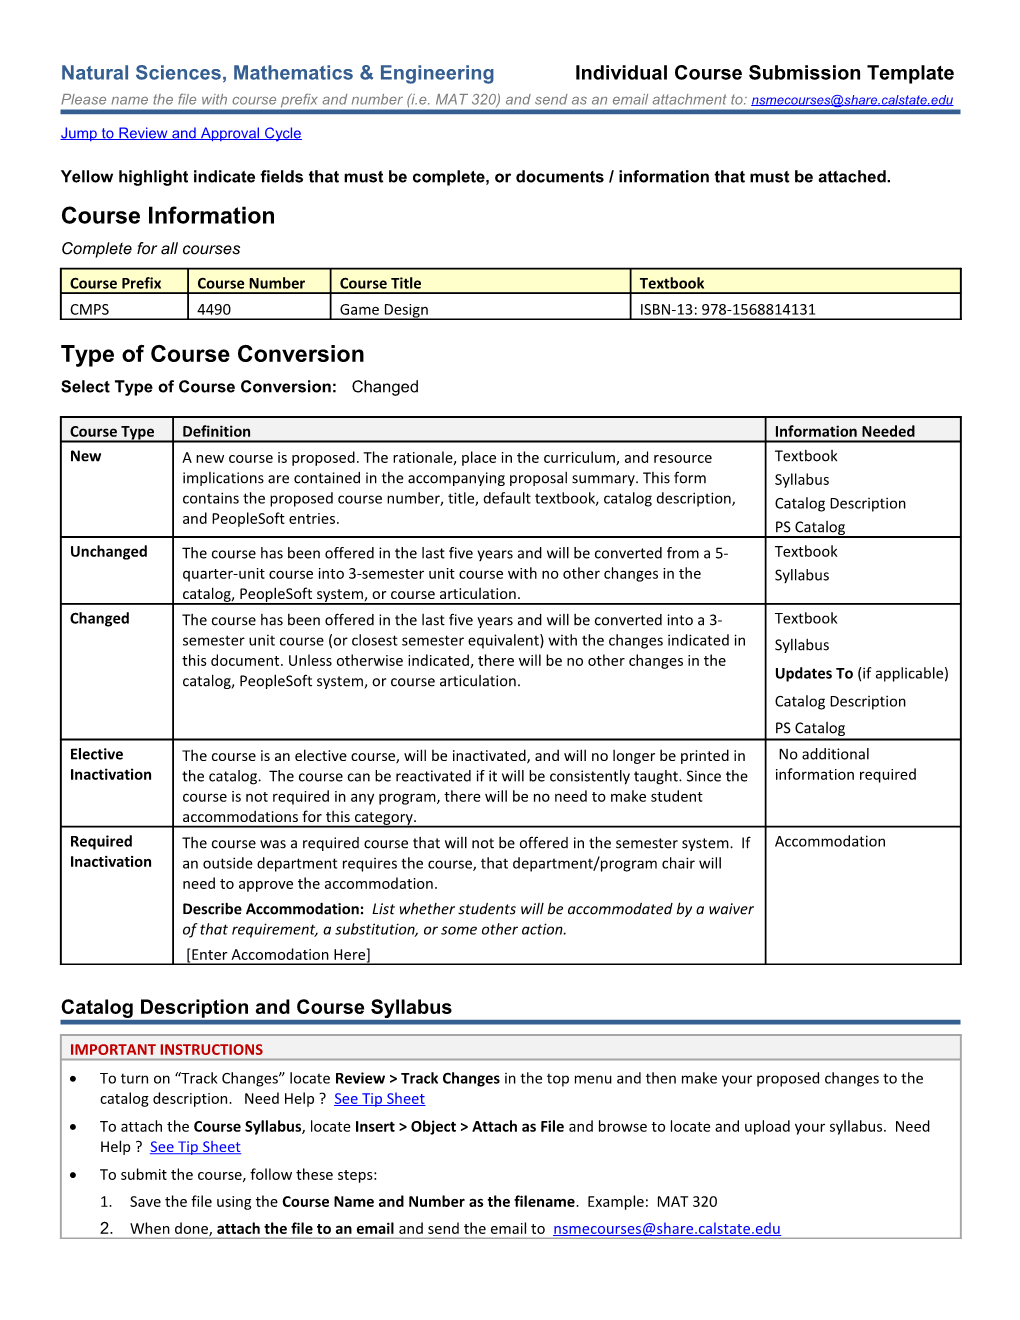 Natural Sciences, Mathematics & Engineering Individual Course Submission Template s2